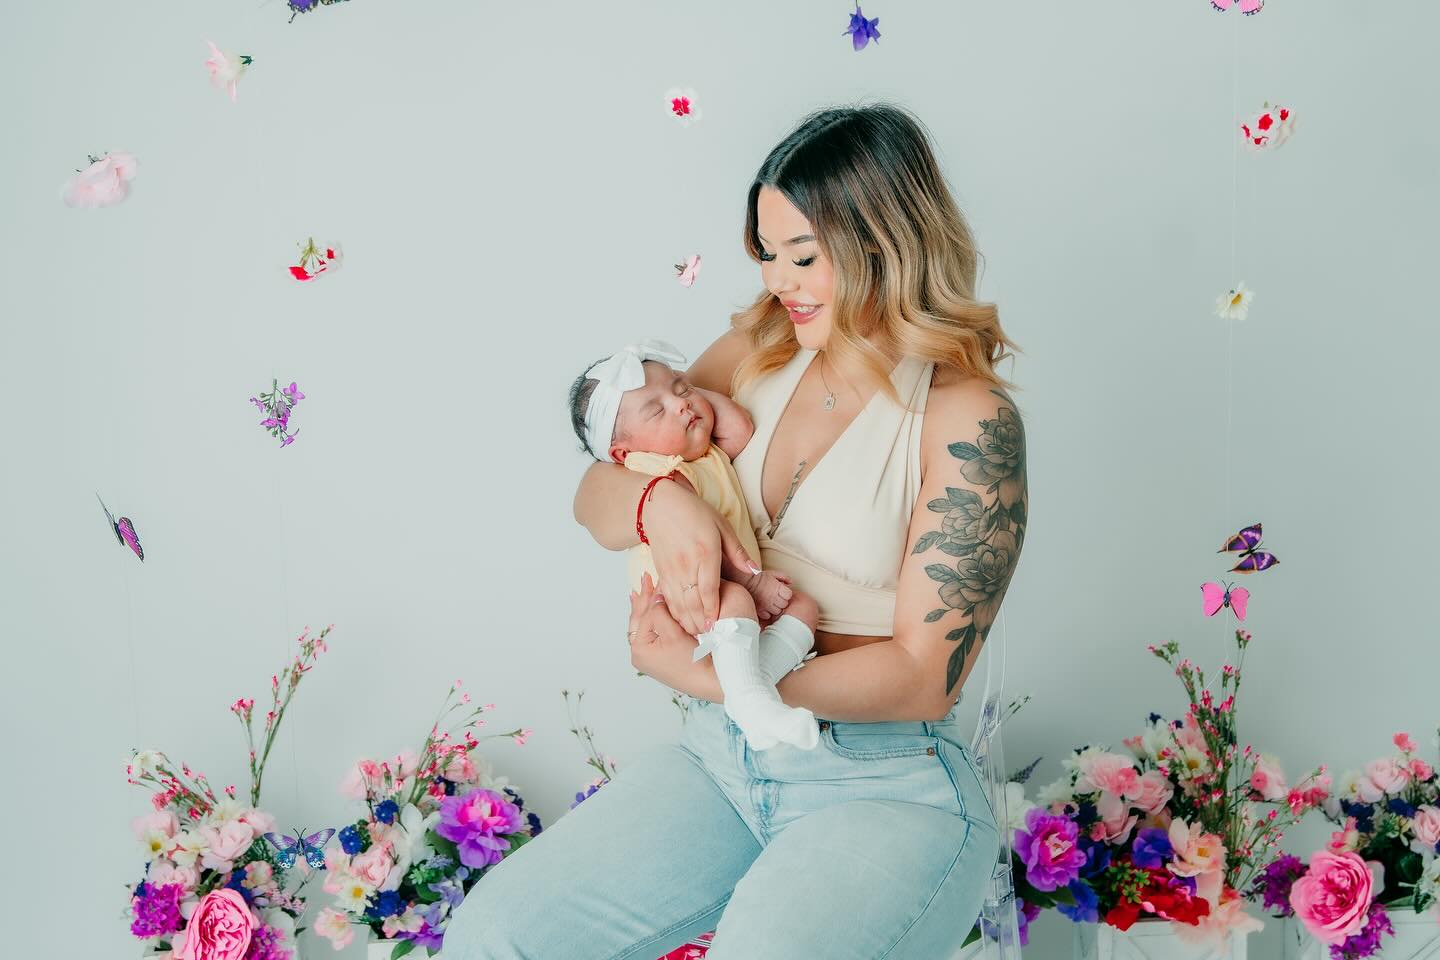 Happy Mother’s Day 💐

you complete my heart , thank you for choosing me to be your mommy. it’s the best beginning life could have given me I love you so much my sweet little lyna 🤍